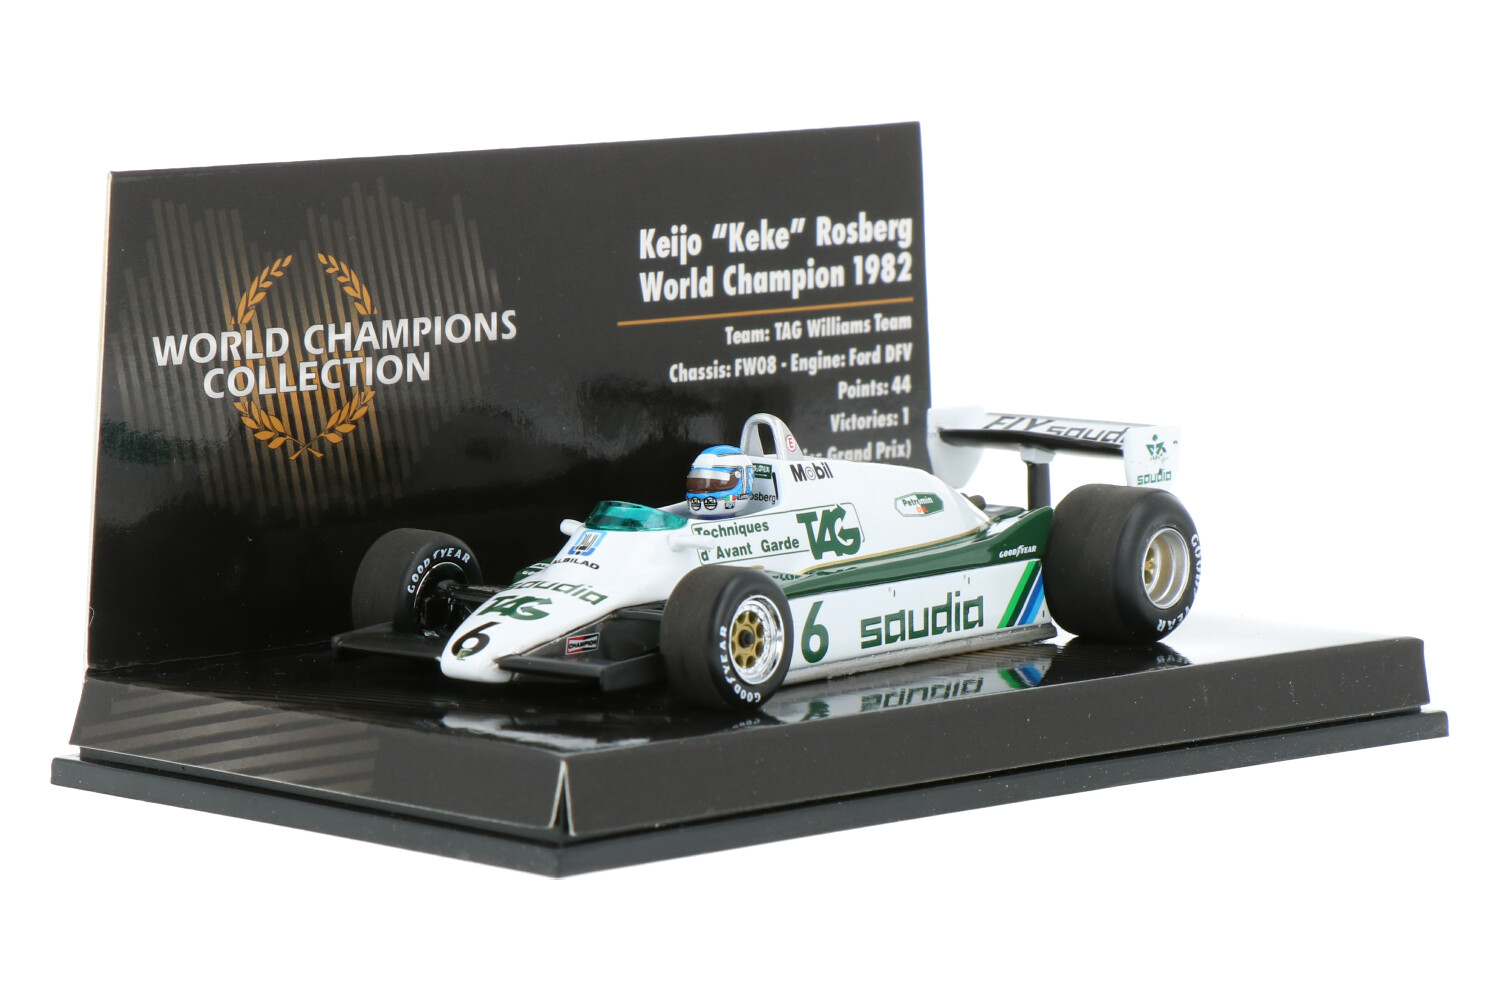 Williams-Ford-FW08-436820106_33154012138053243-Minichamps-Williams-Ford-FW08-436820106_Houseofmodelcars_.jpg